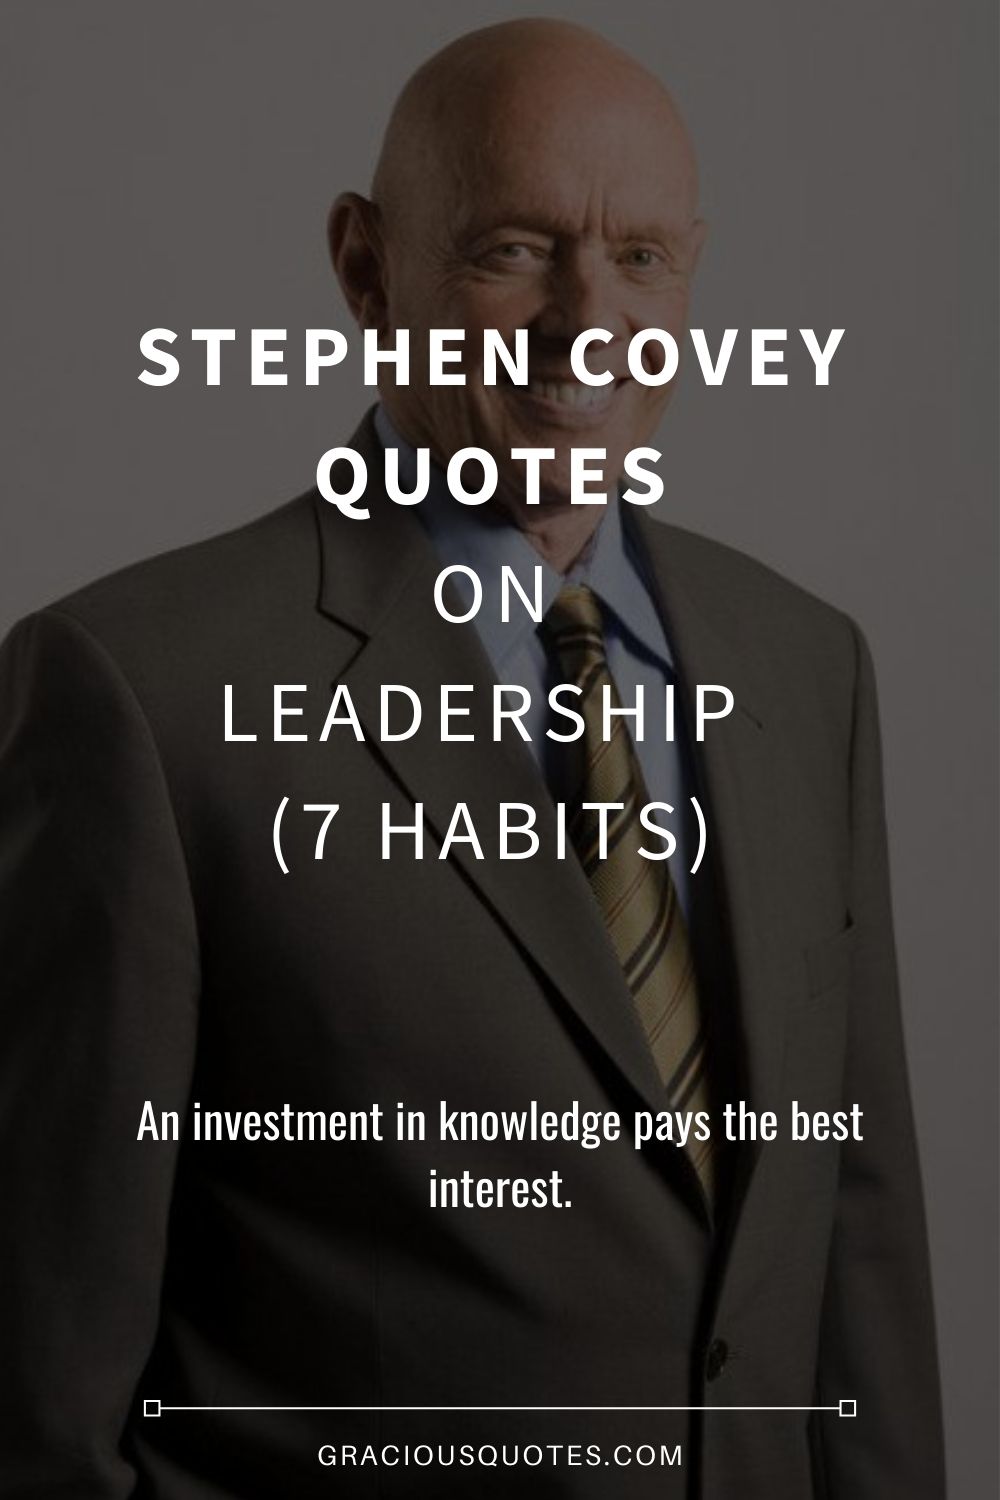 Stephen Covey Quotes on Leadership (7 HABITS) - Gracious Quotes